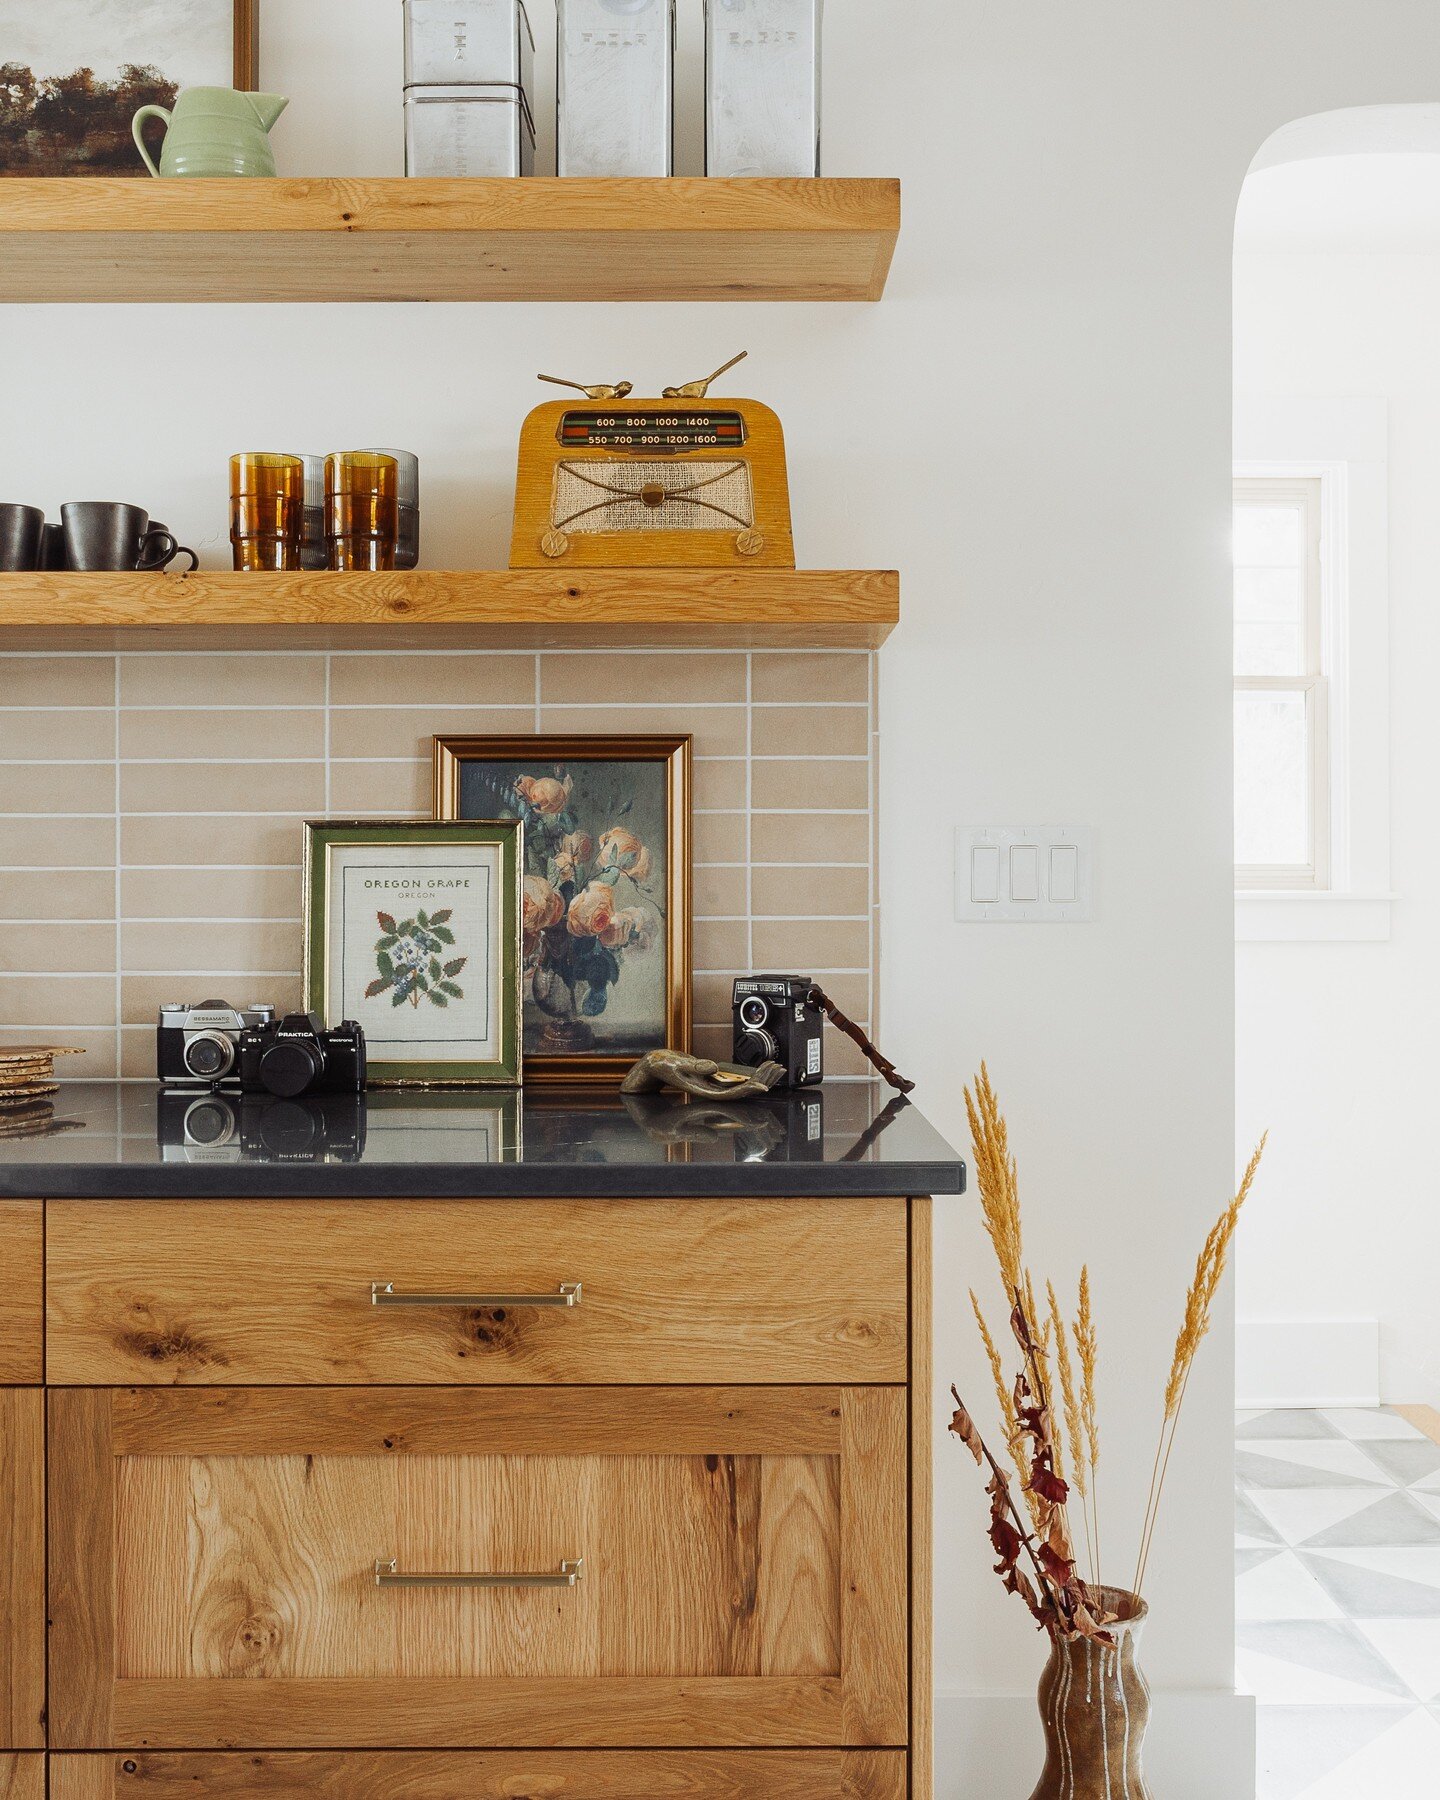 A &quot;hutch nook&quot; created a dedicated area for coffee, tea, art, and collectibles. Open shelving kept the small space light and airy. Swipe to see before.

Photo by: @gallivancreative
Styling: Jenny Andrews

#bendremodel #millhouse